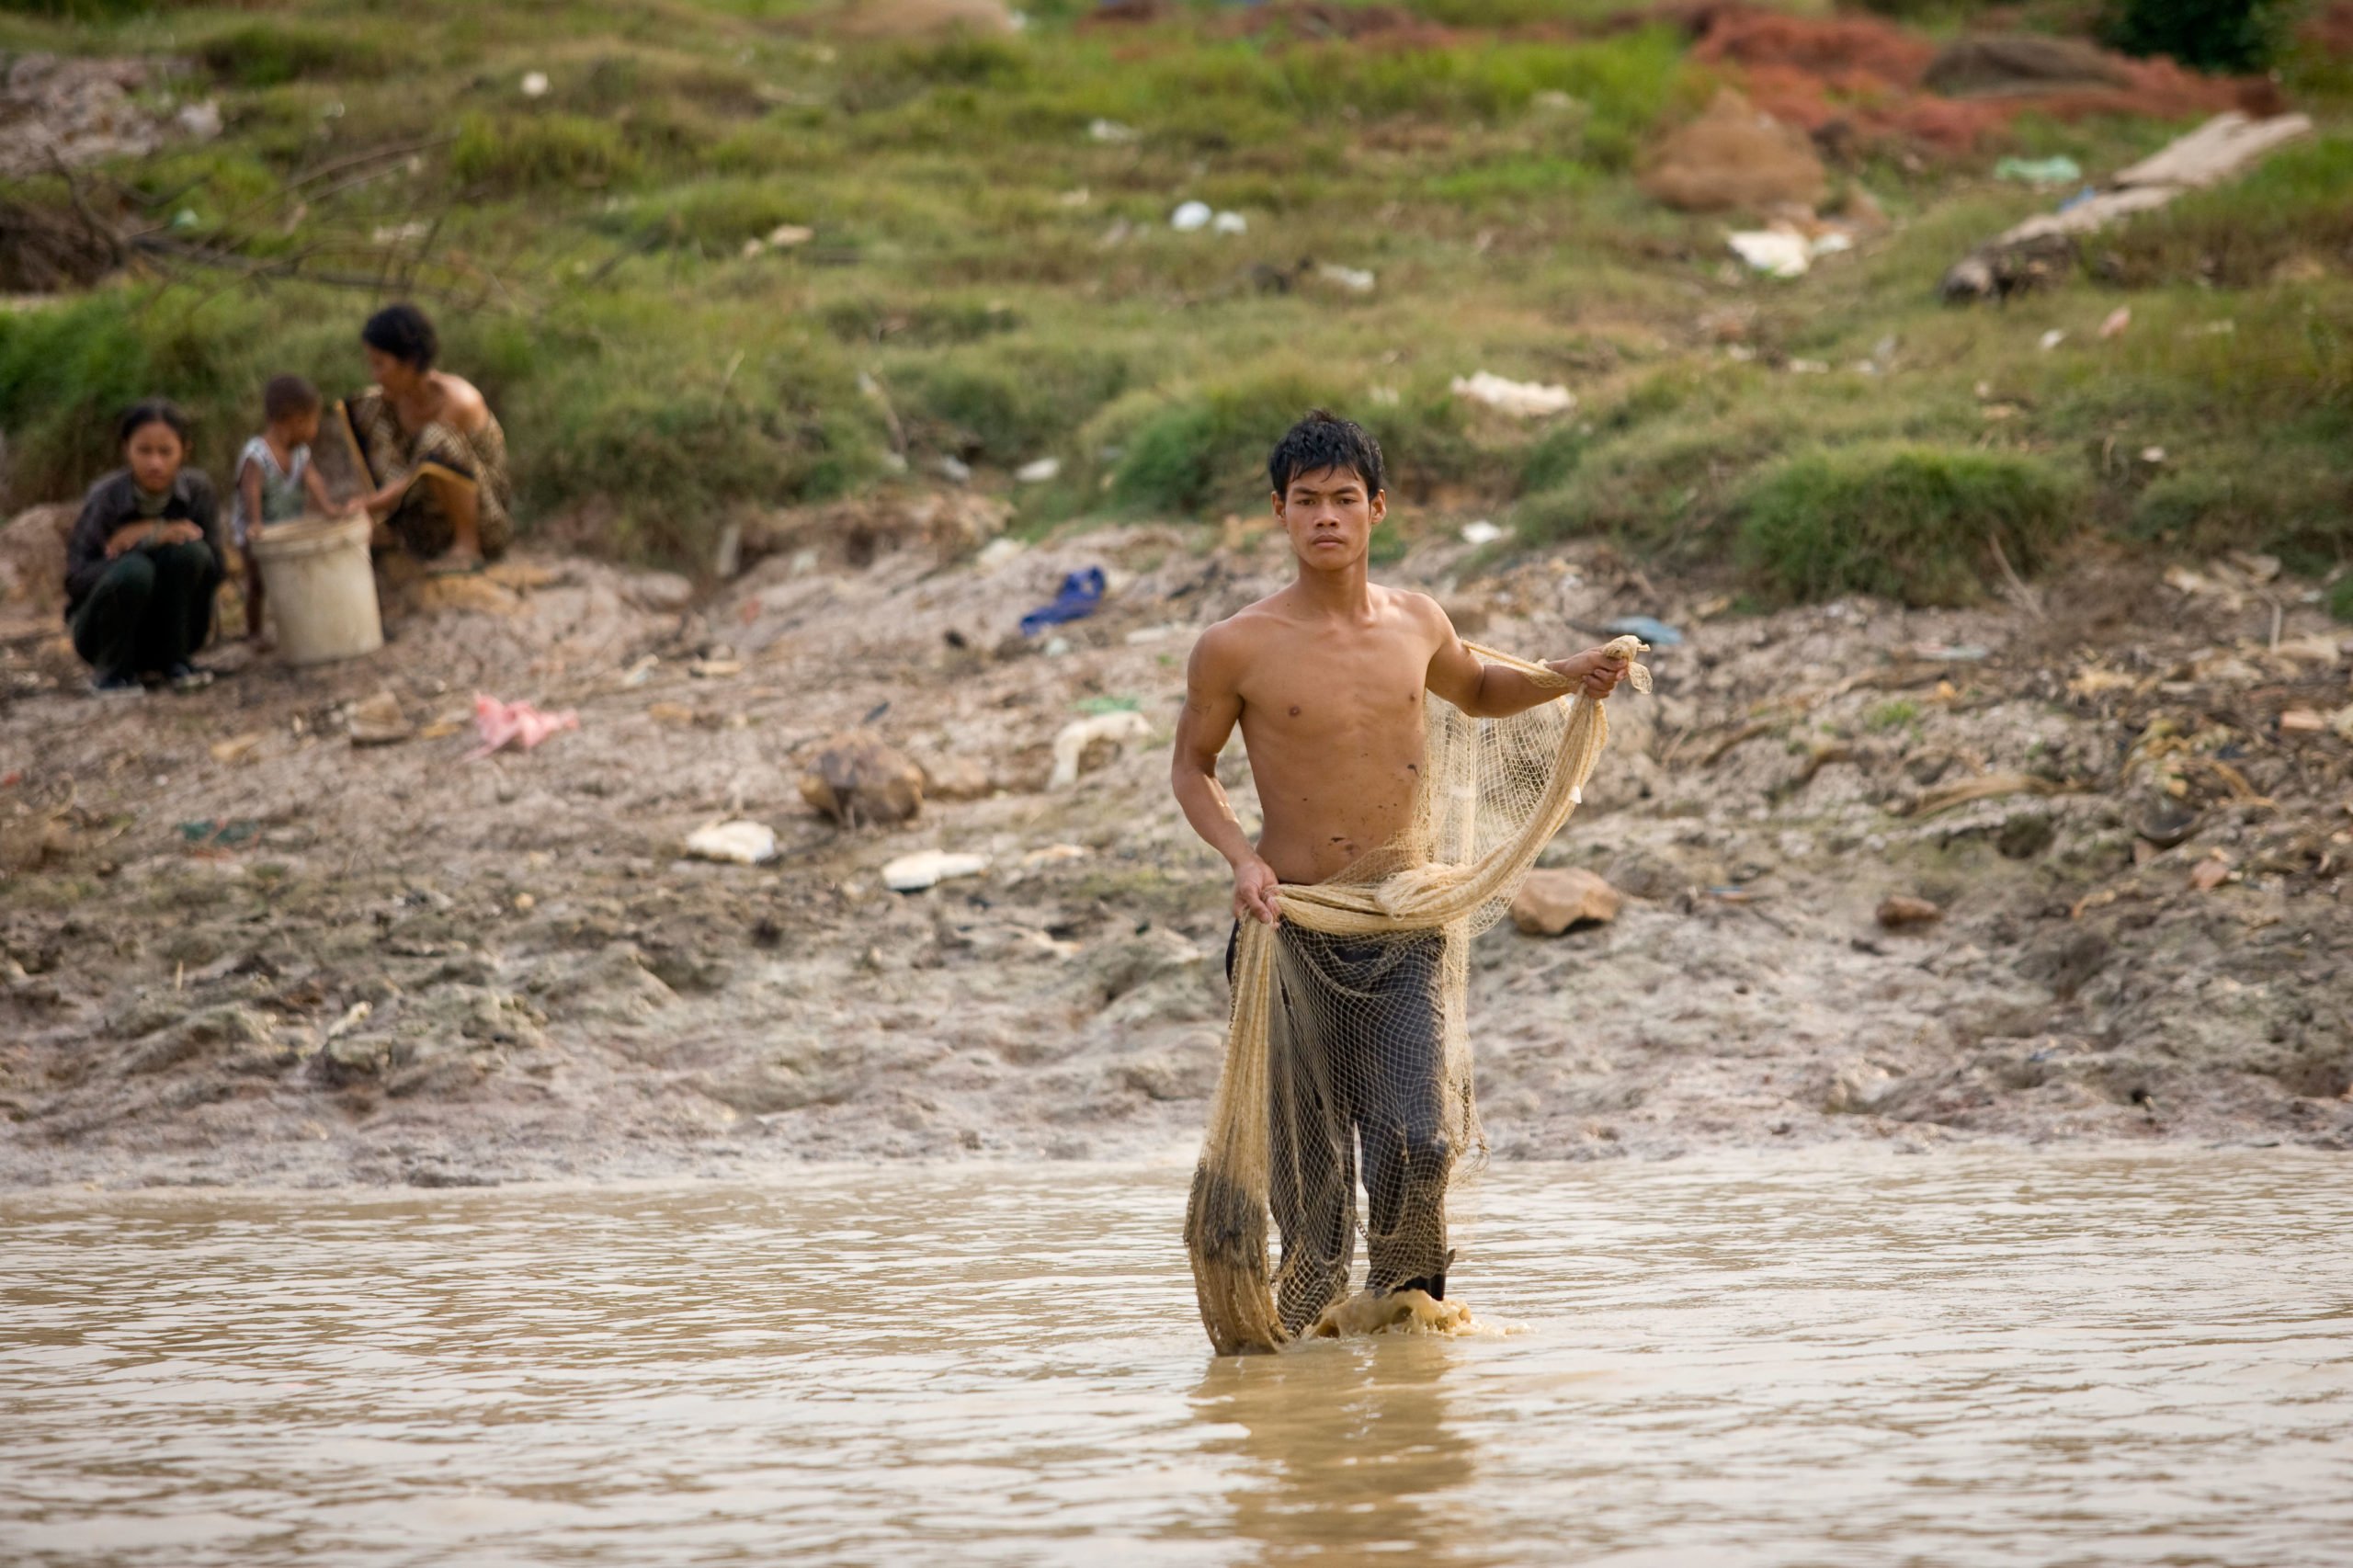 A Cambodia man fishes on the Tonle Sap lake